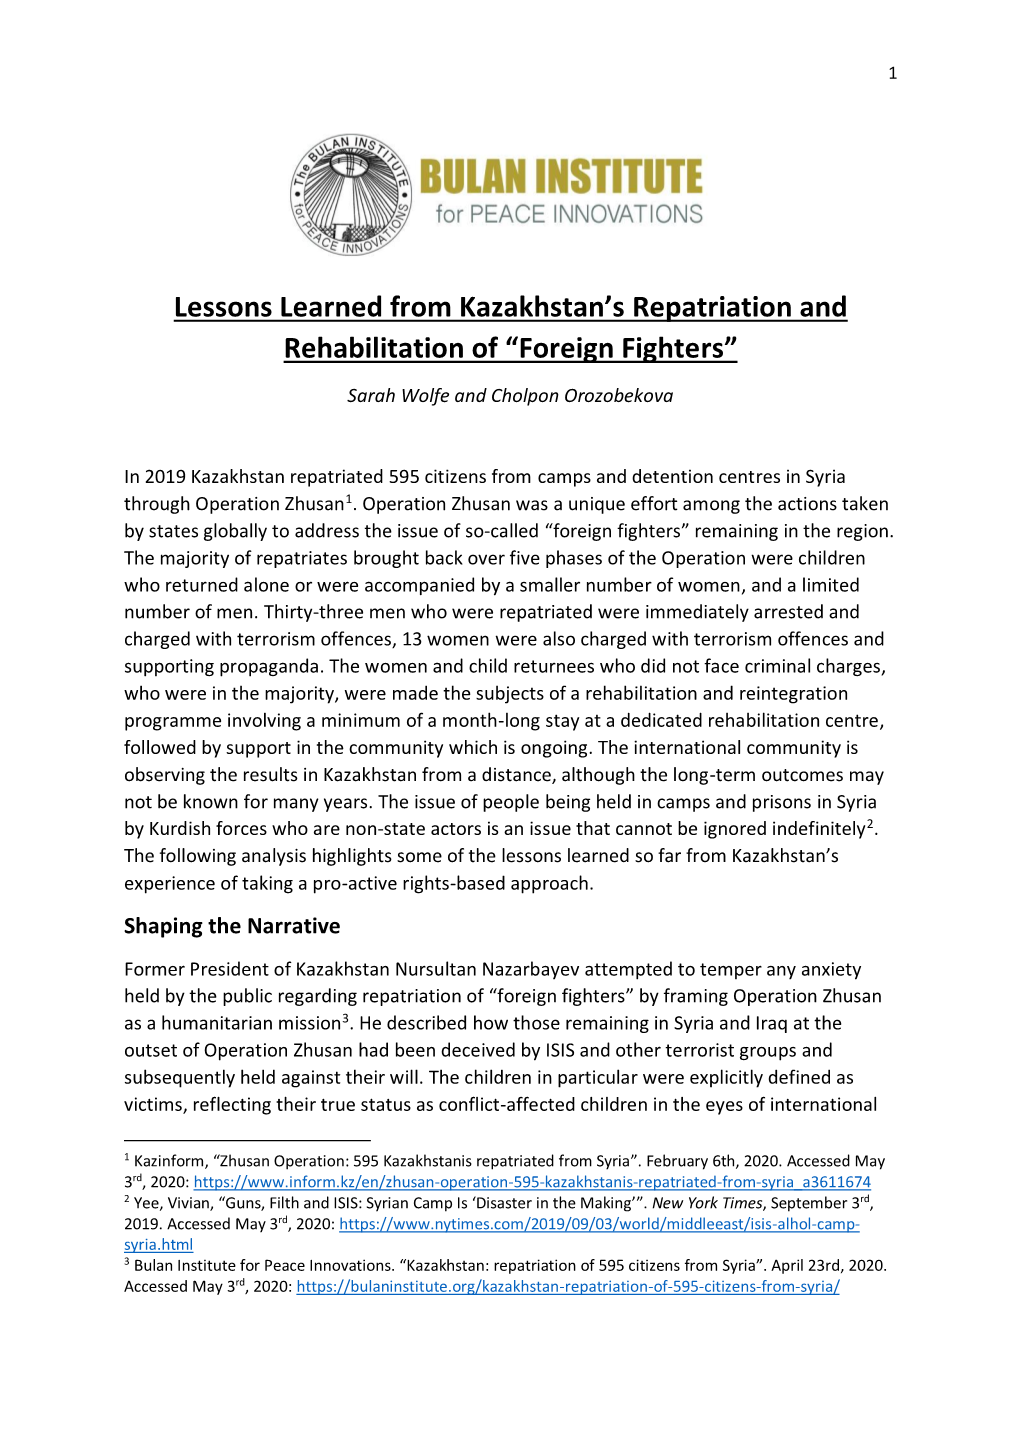 Lessons Learned from Kazakhstan's Repatriation and Rehabilitation Of